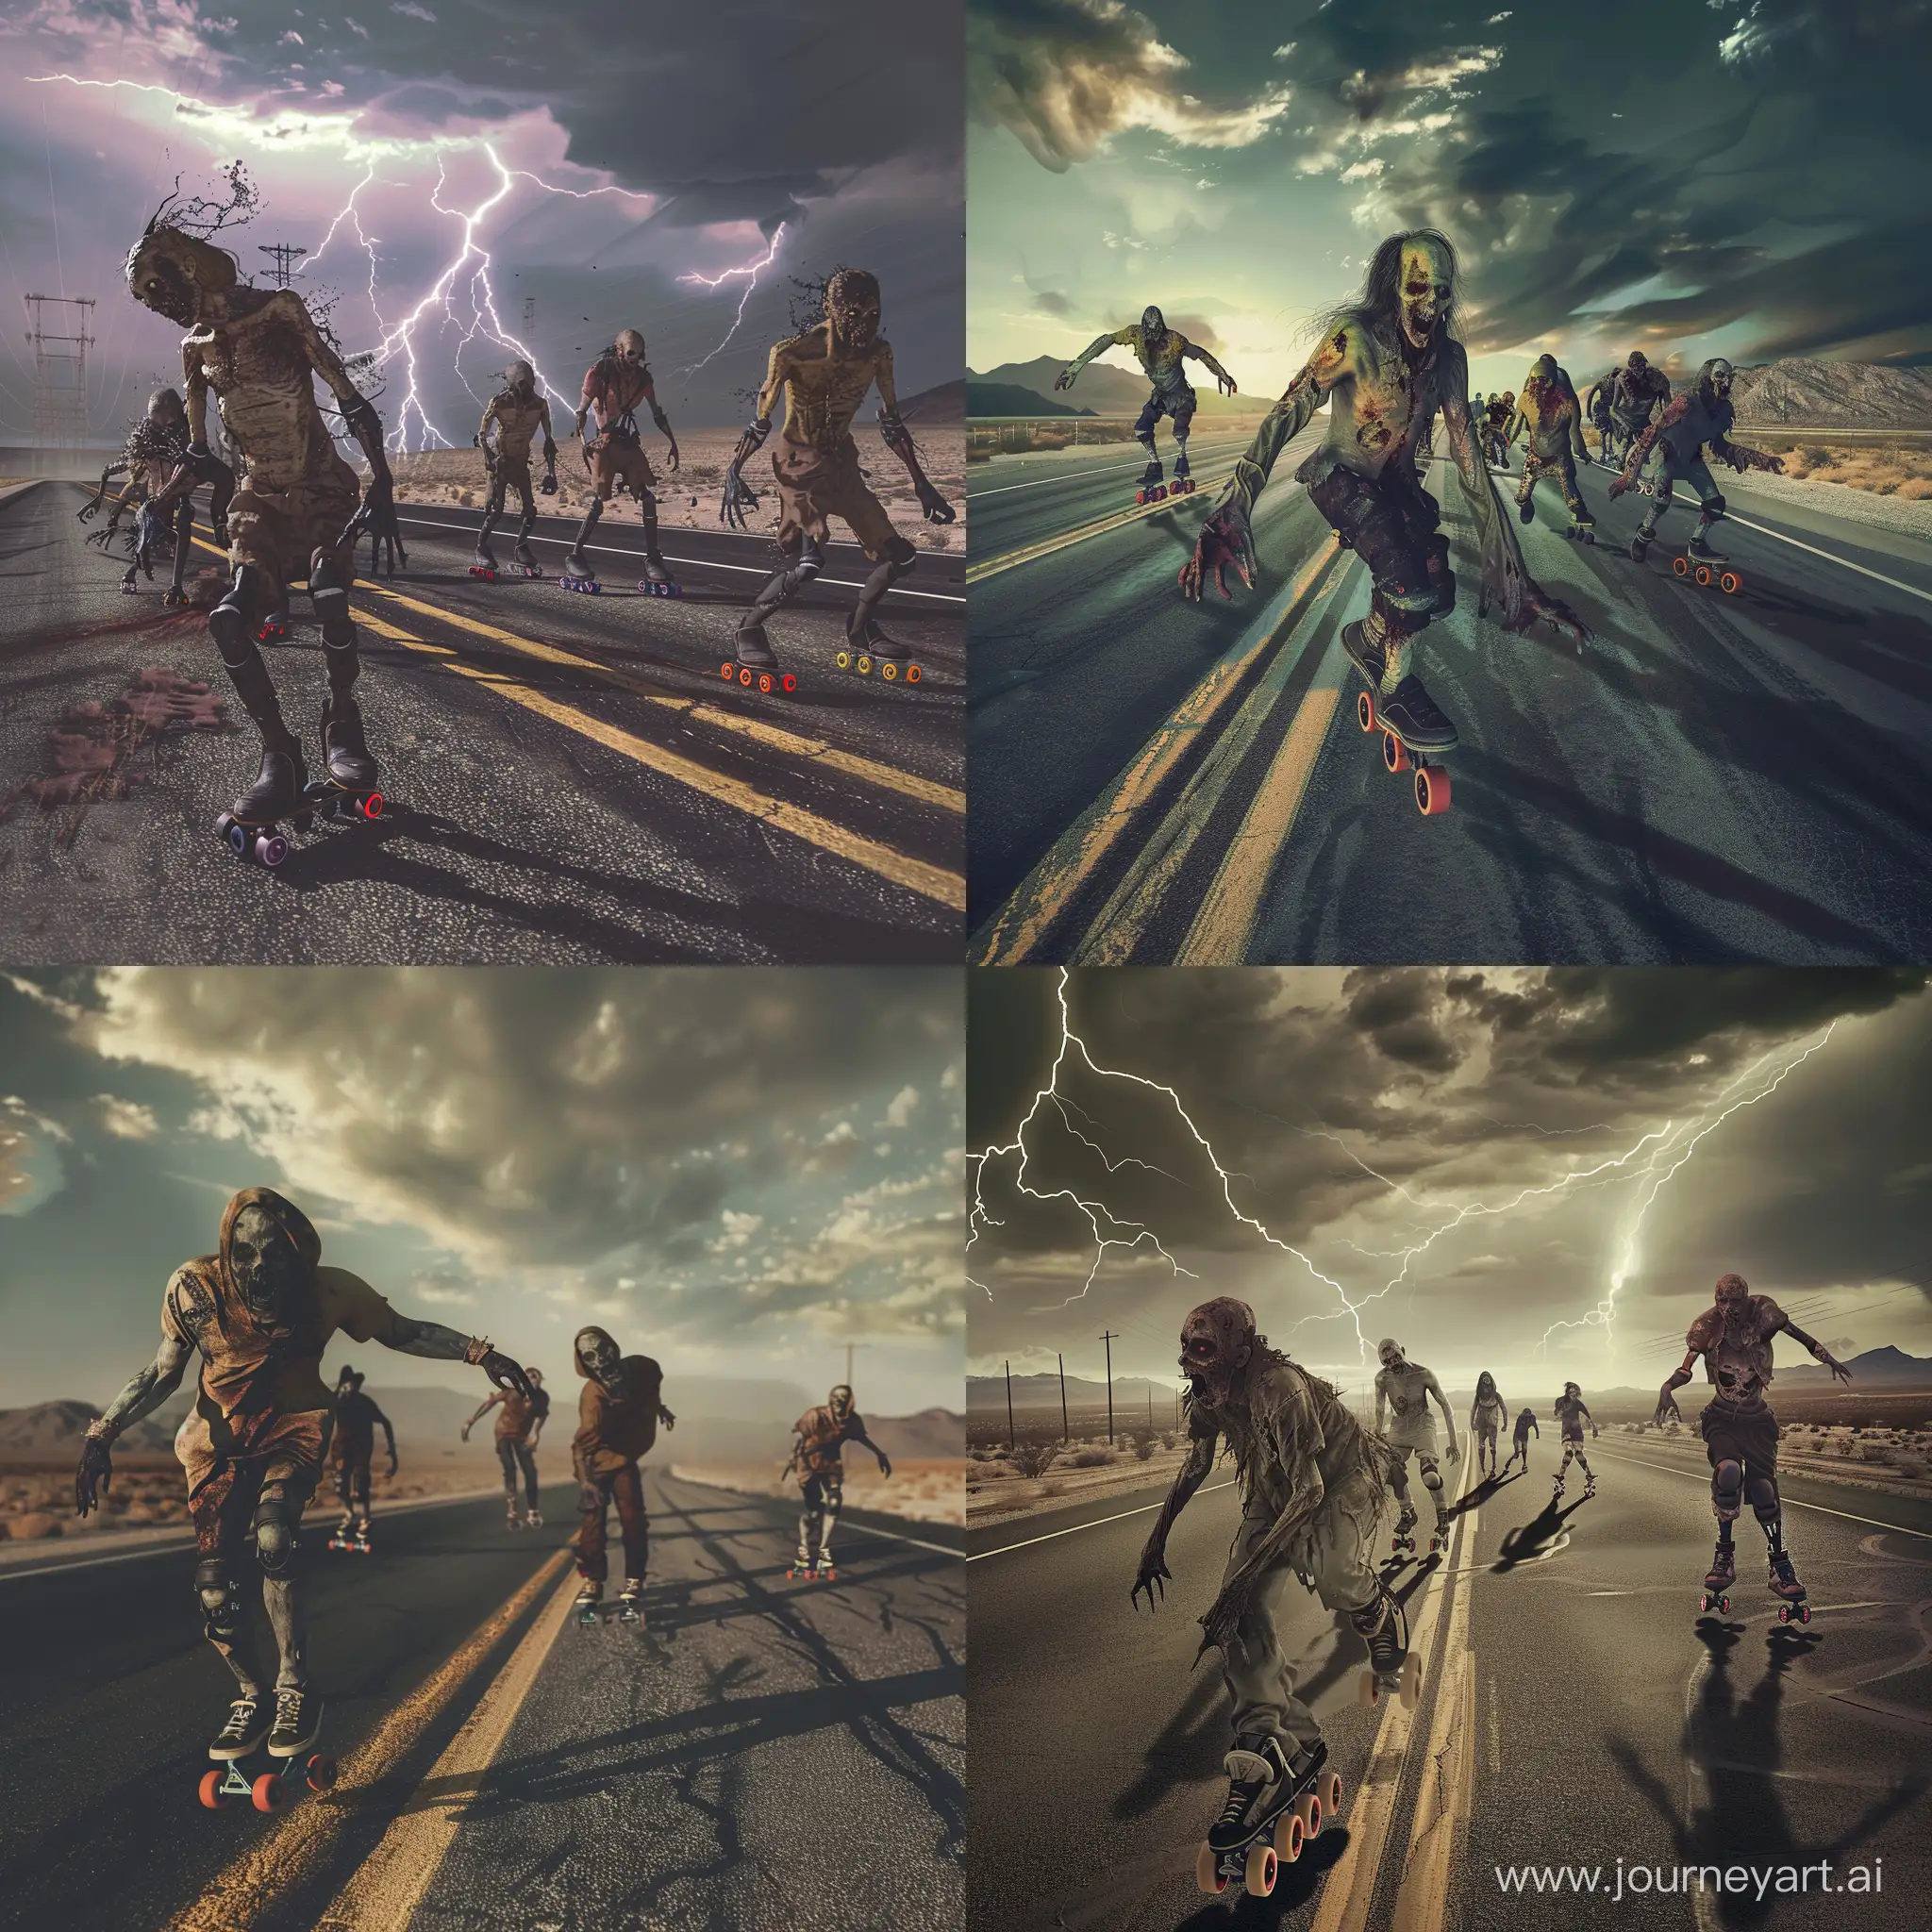 Eerie-Zombie-Roller-Skaters-Conquer-Desolate-Desert-Highway